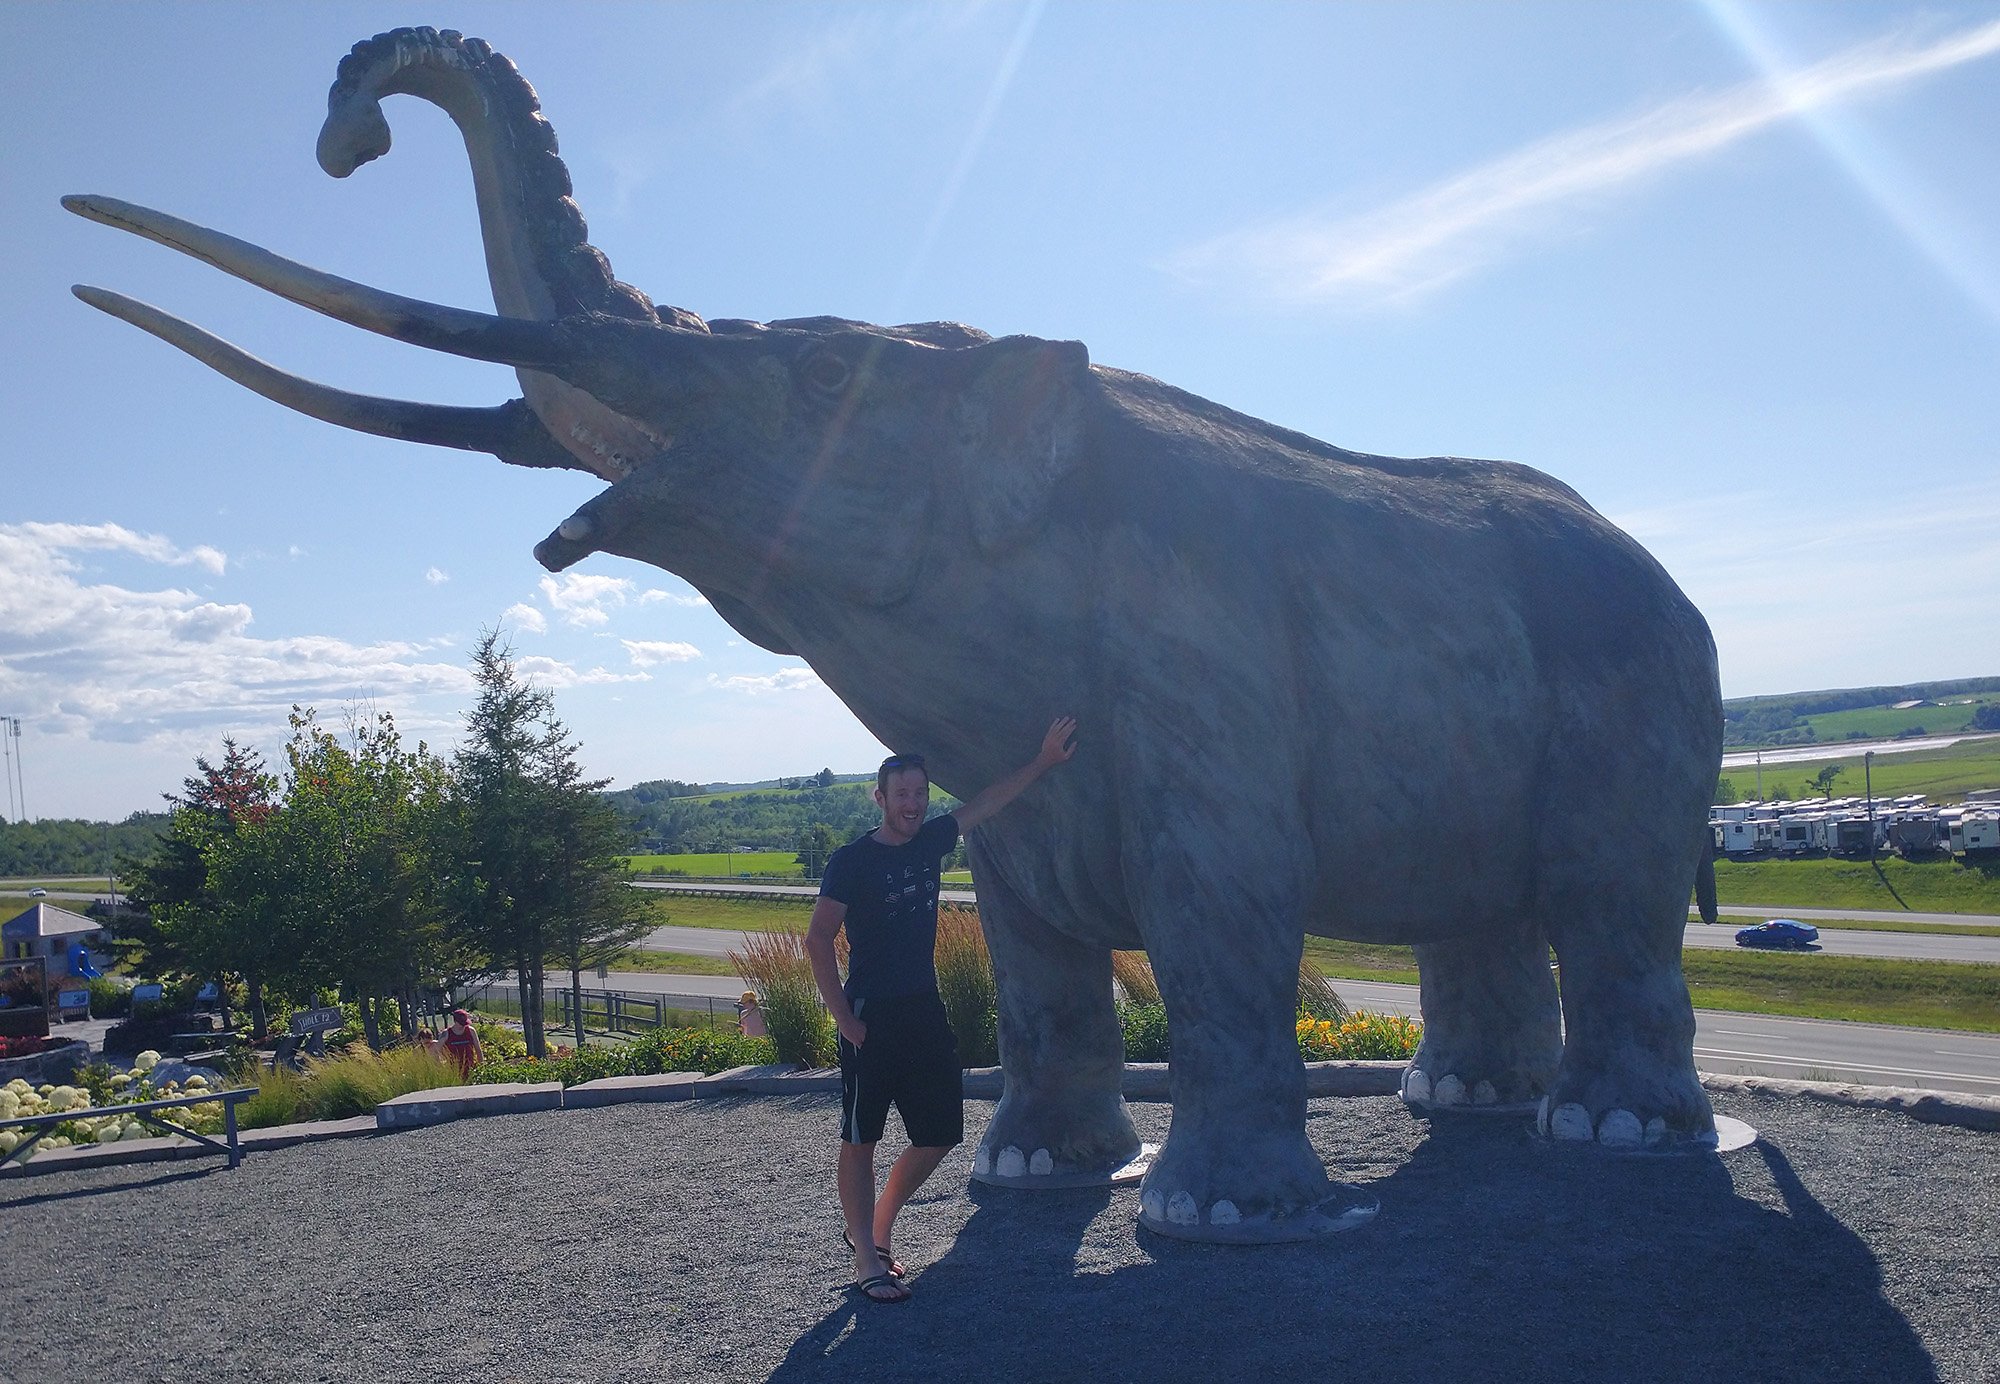 As you keep going north you'll pass by Mastodon Ridge, right off the highway. It's a large road stop with tons of restaurants and a caveman themed miniputt.